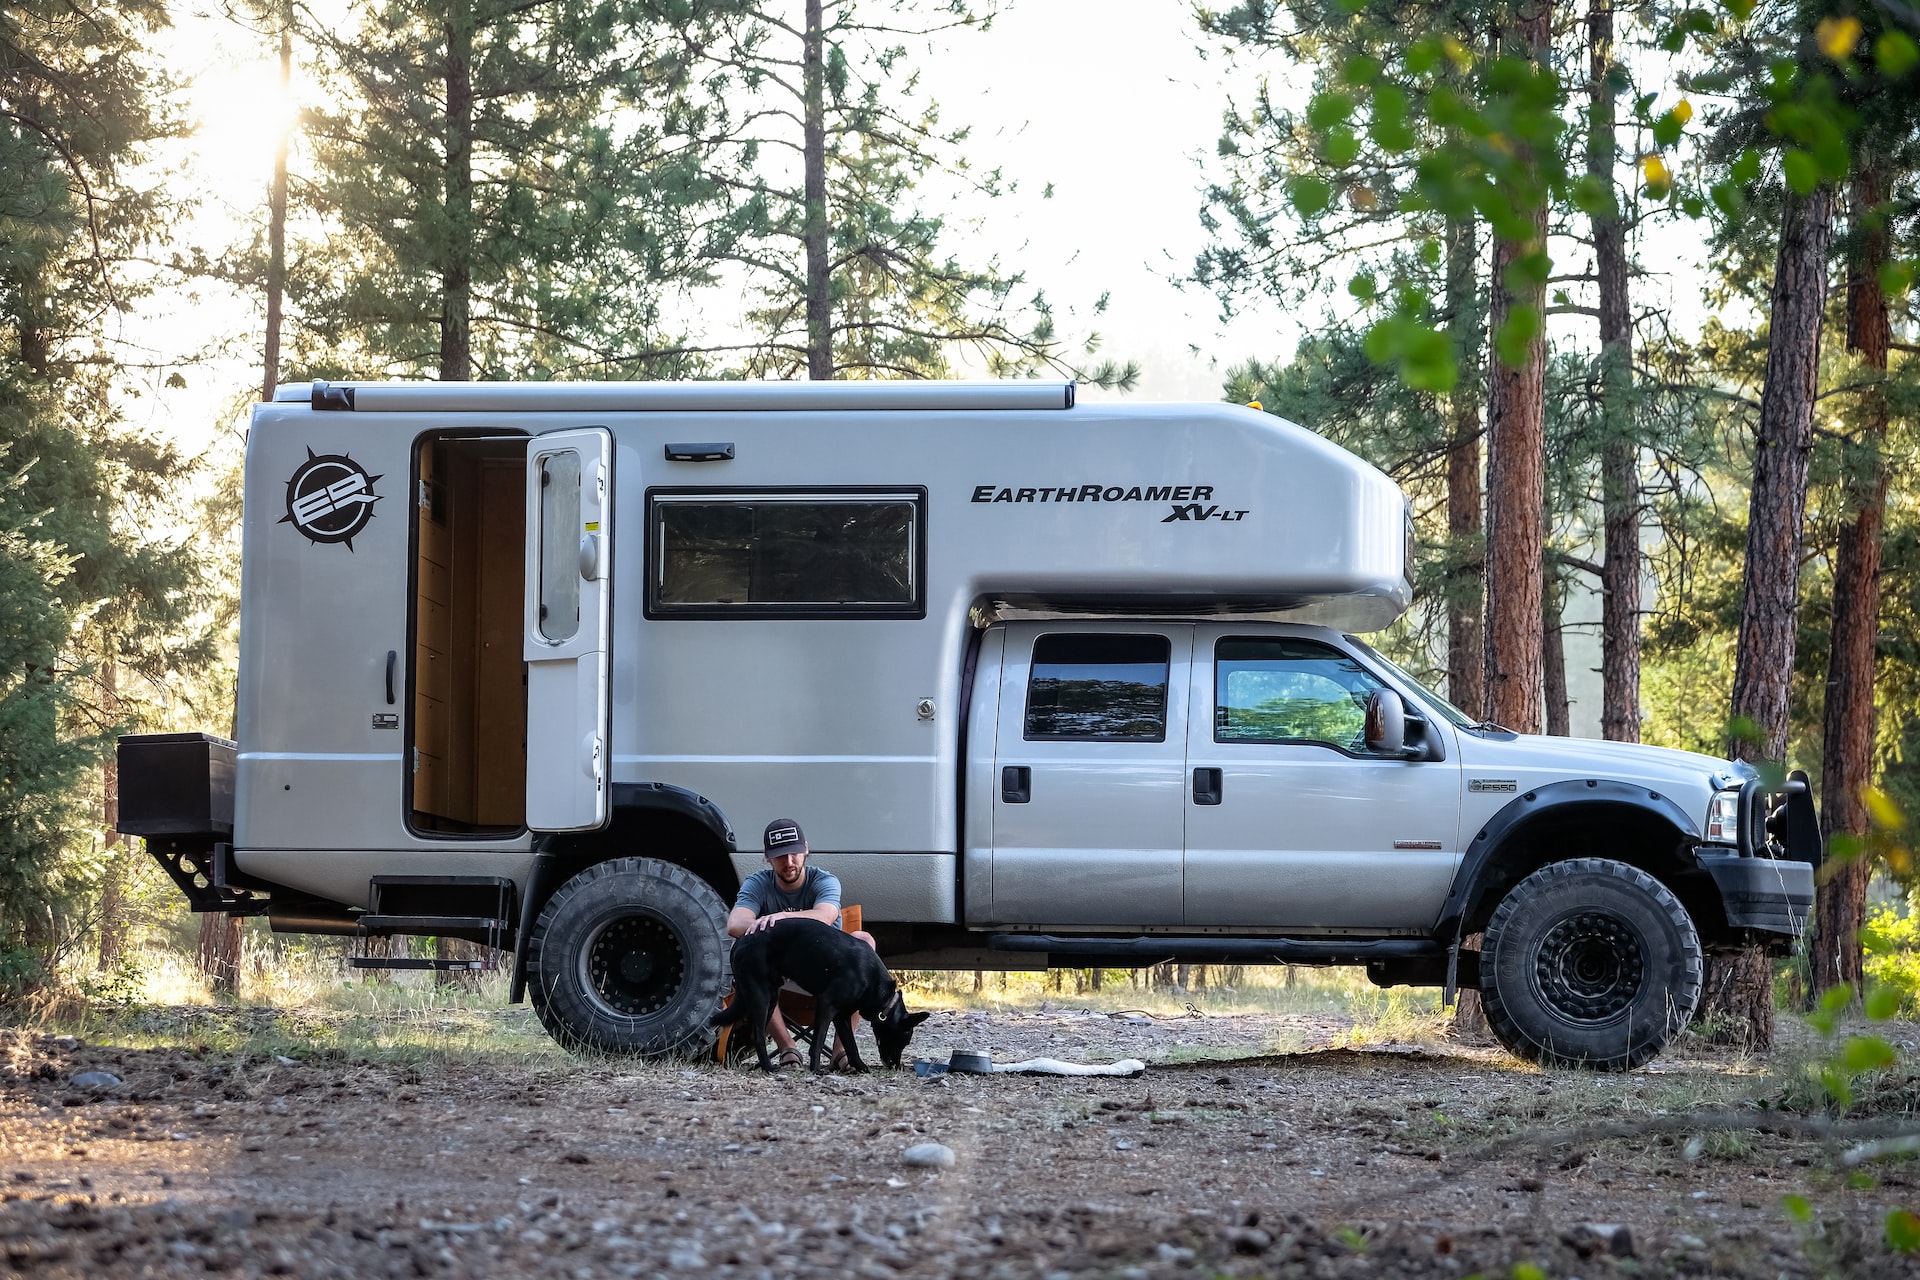 A diesel looking camper in the middle of the woods with a man sitting down near the ground next to his black dog.